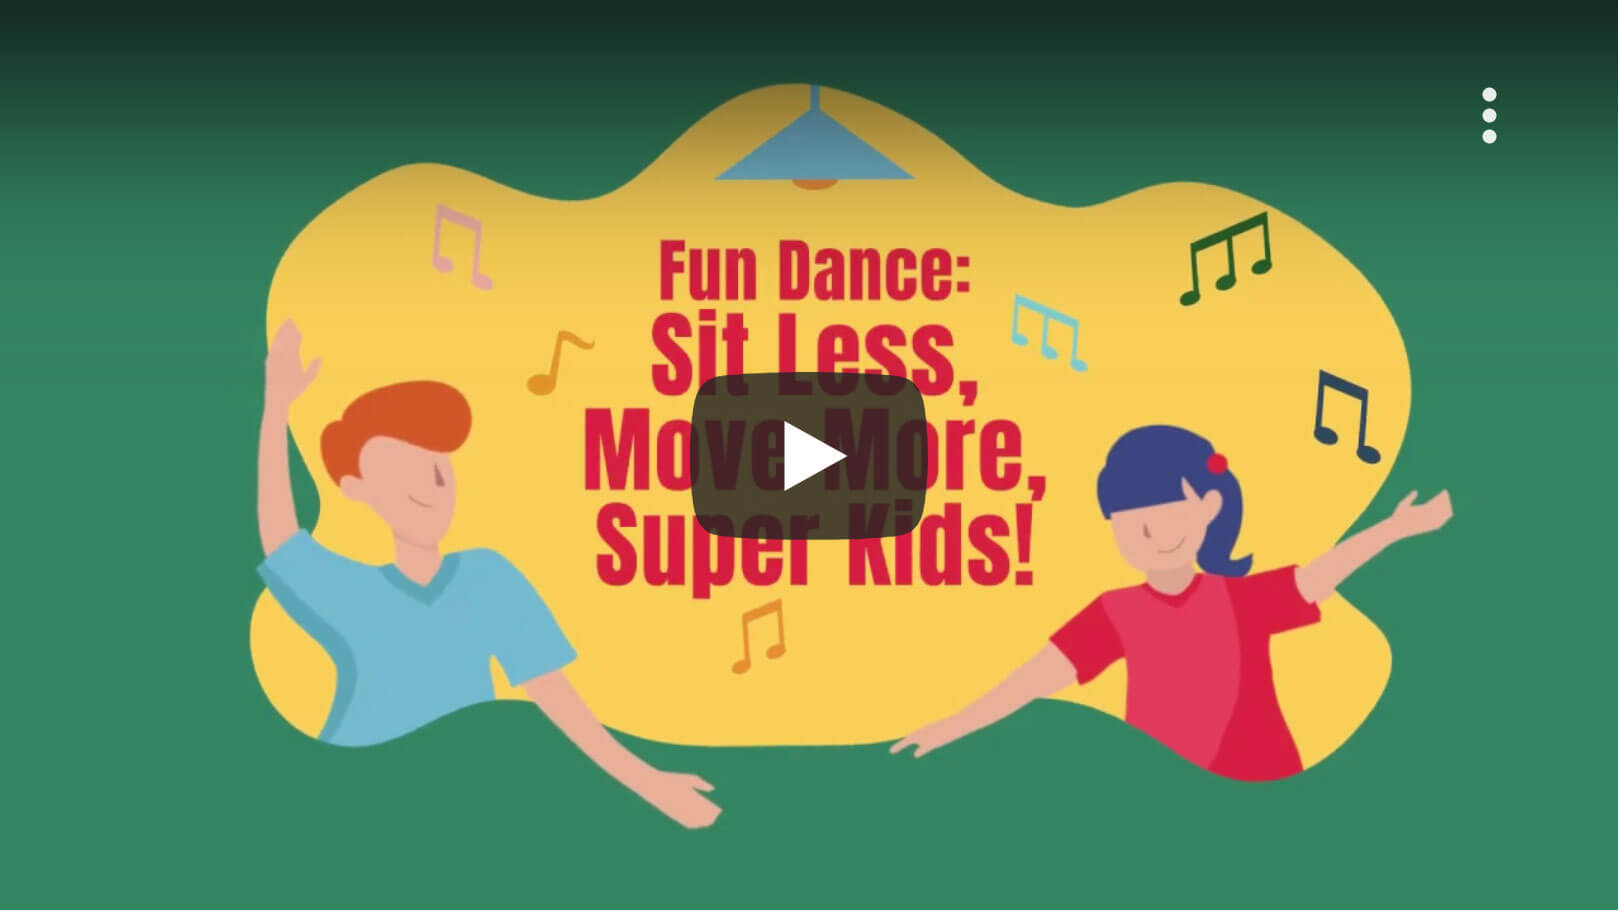 Fun Dance: The Sit Less, Move More Dance for healthy kids